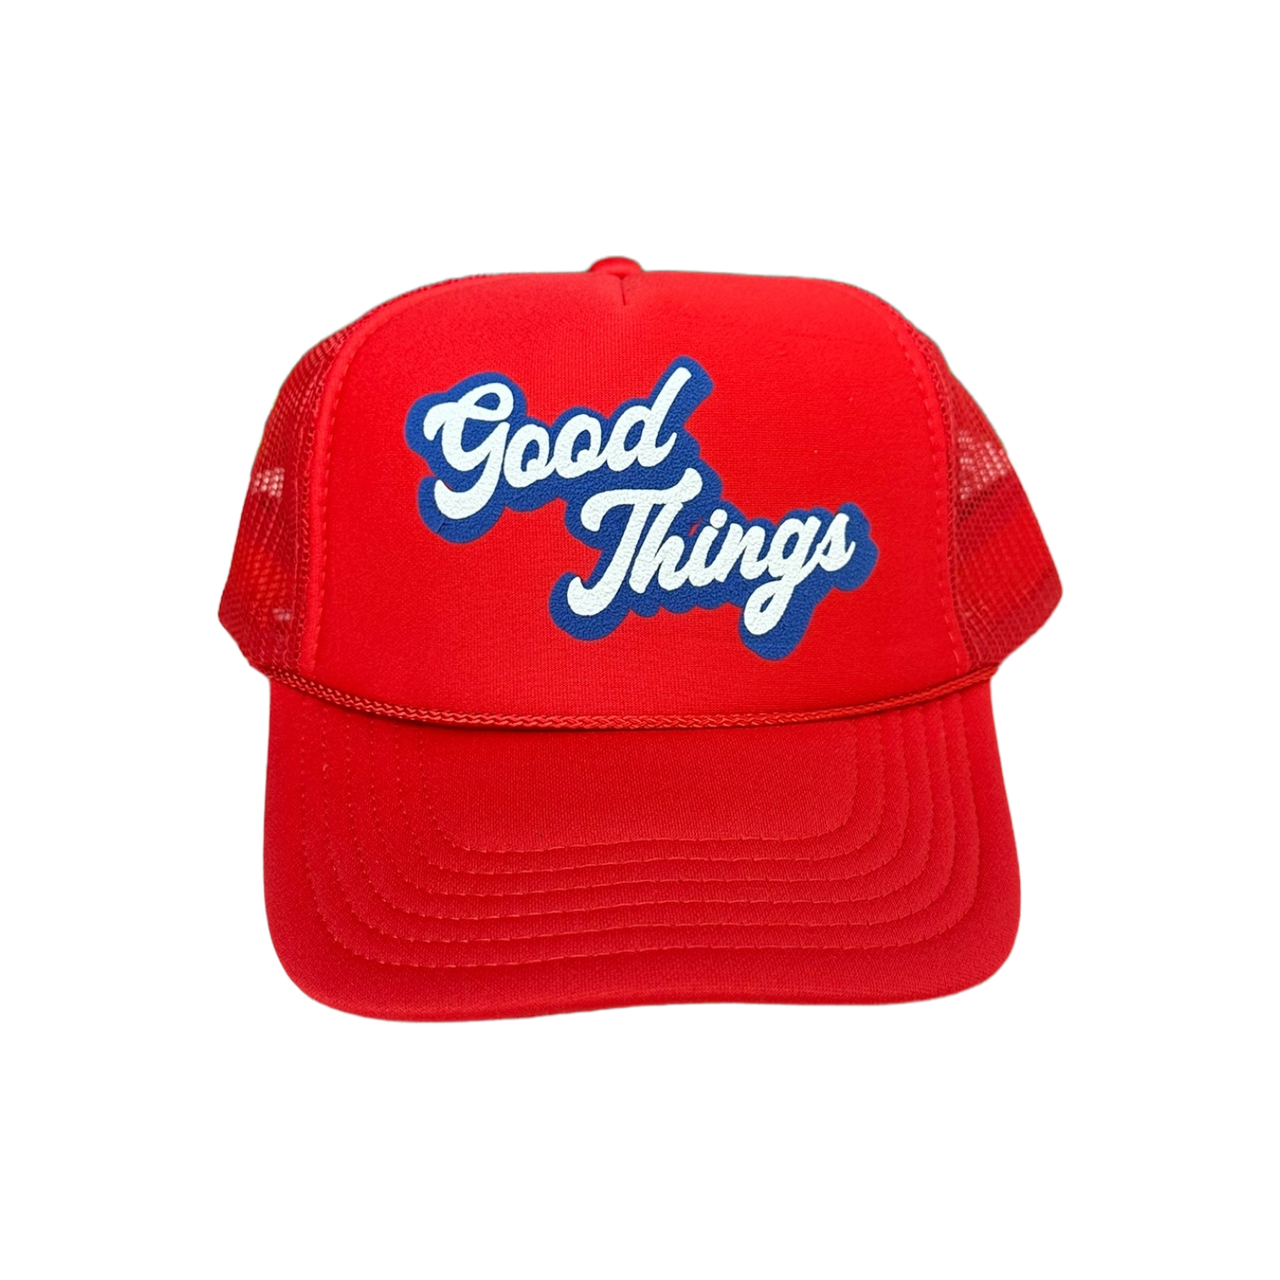 Good Things - Red Trucker